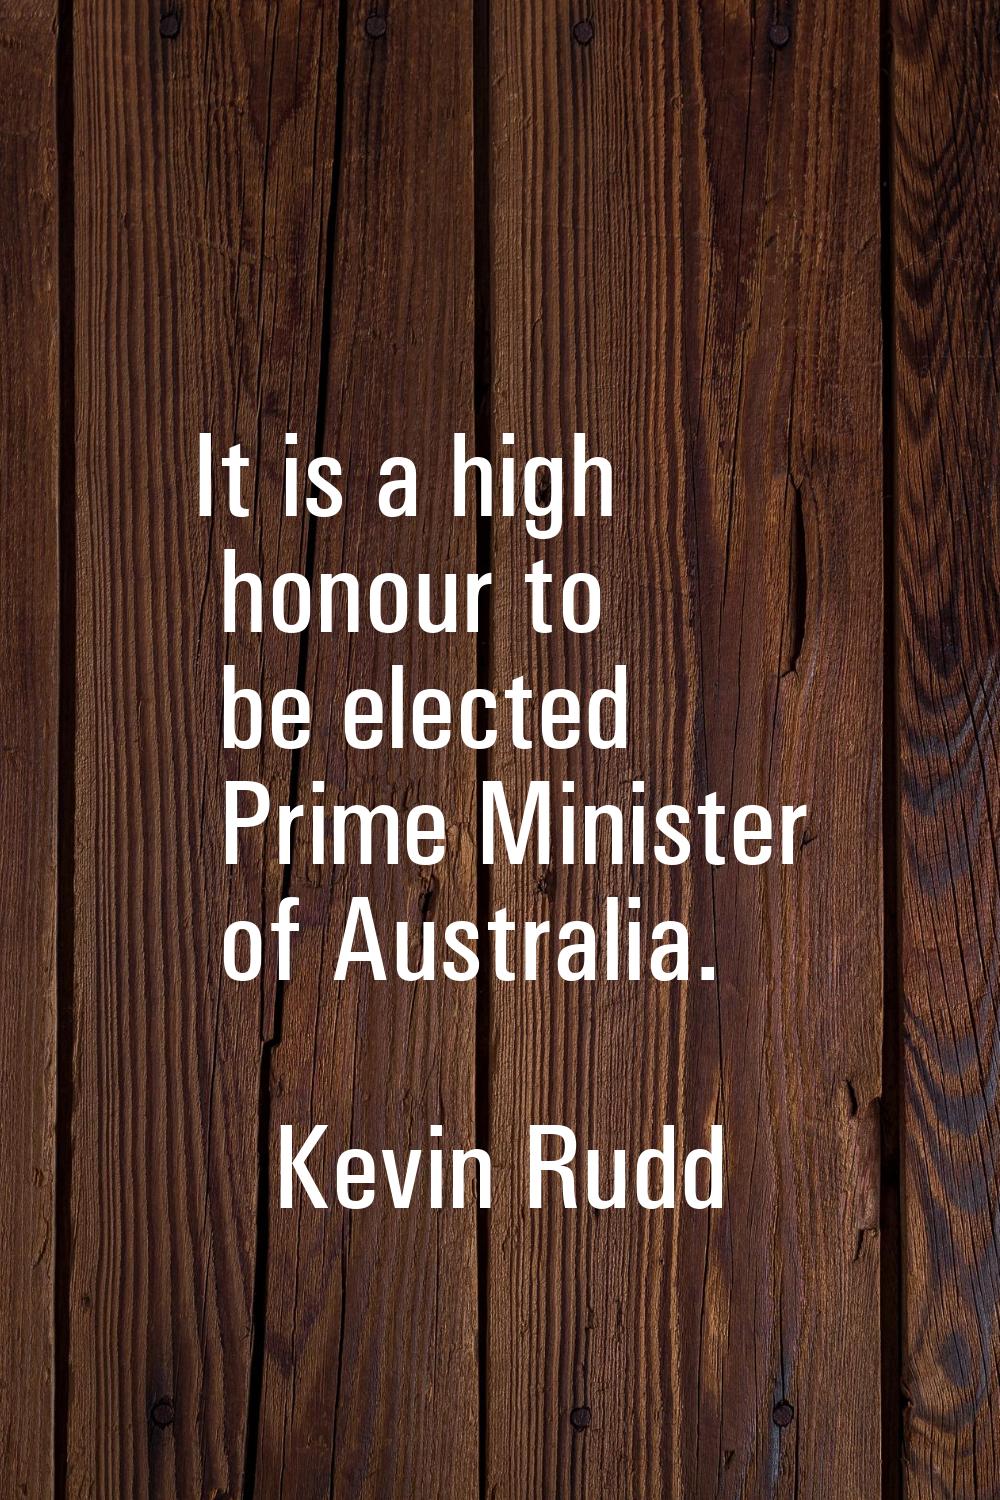 It is a high honour to be elected Prime Minister of Australia.